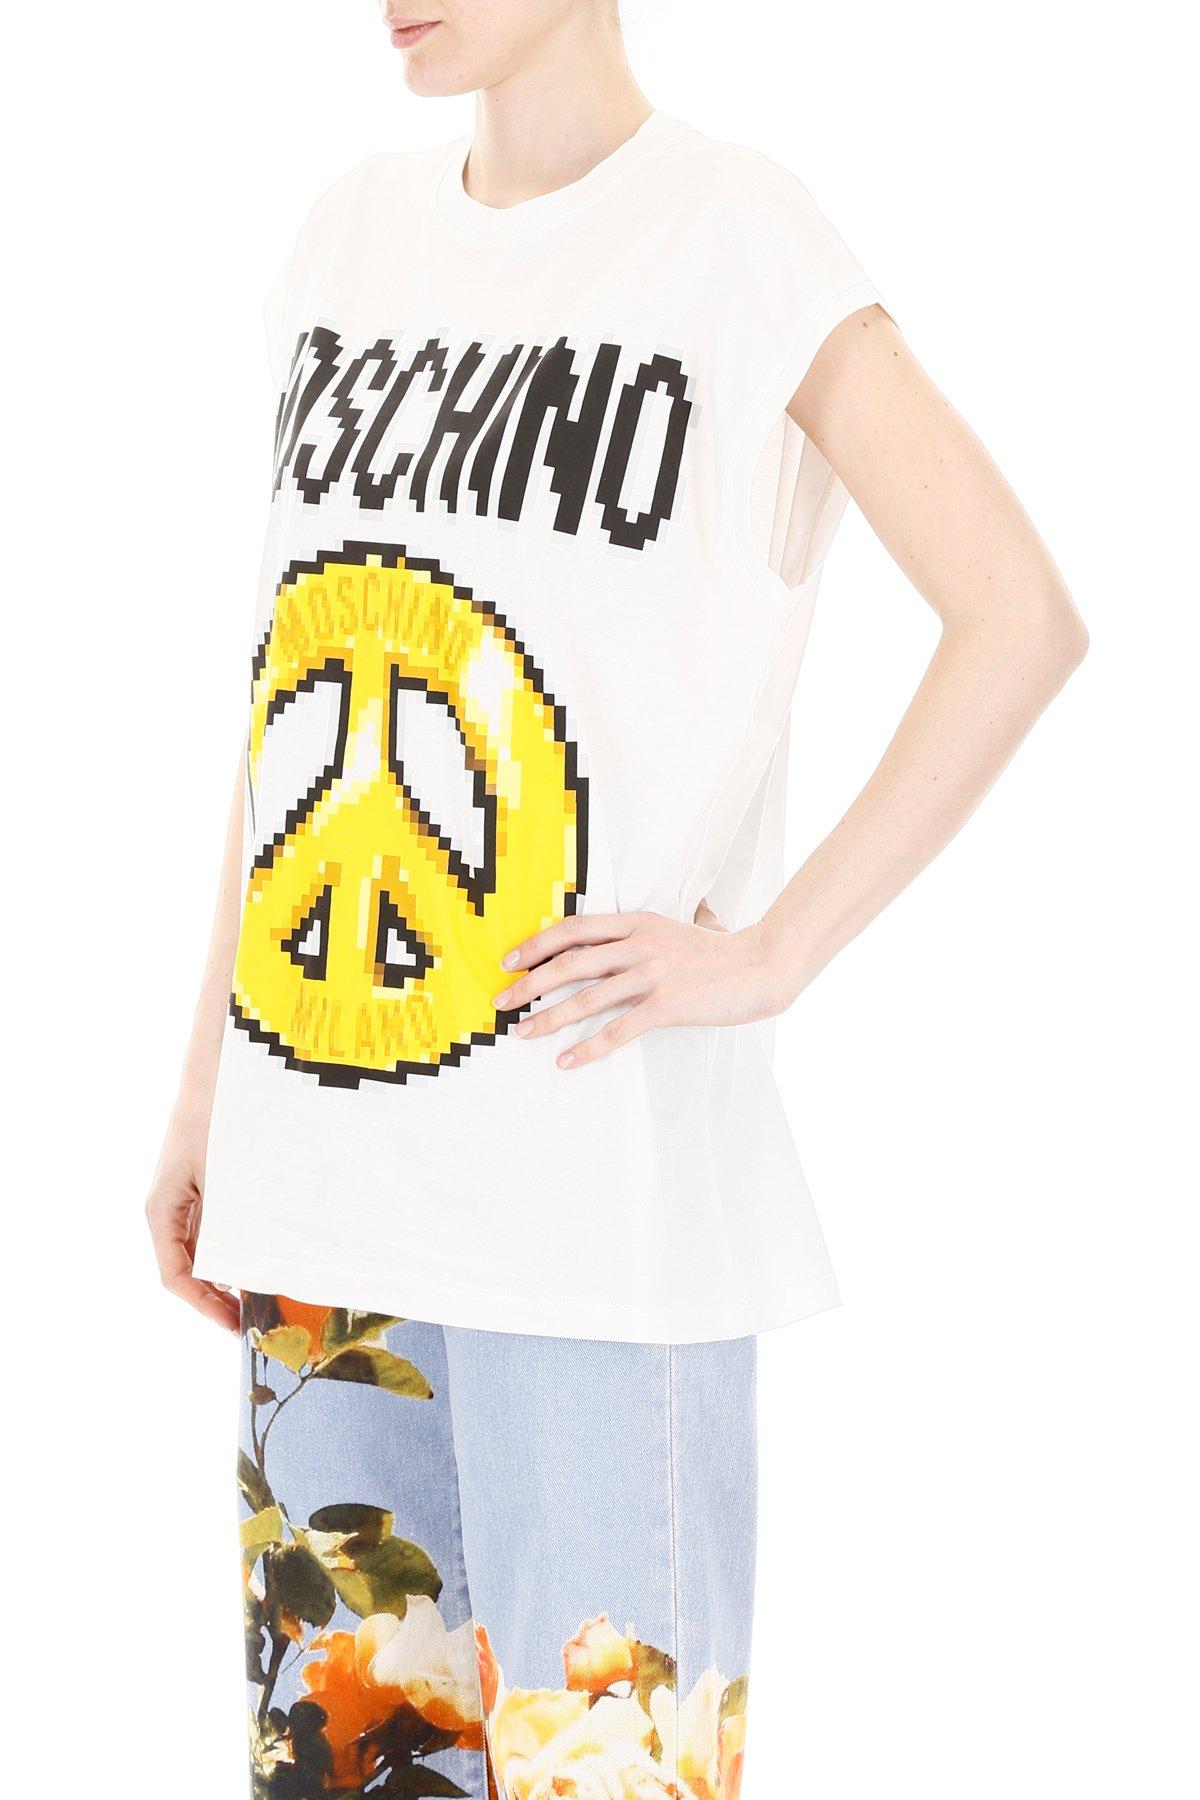 Moschino Cotton Peace Pixel Print T-shirt in White - Lyst